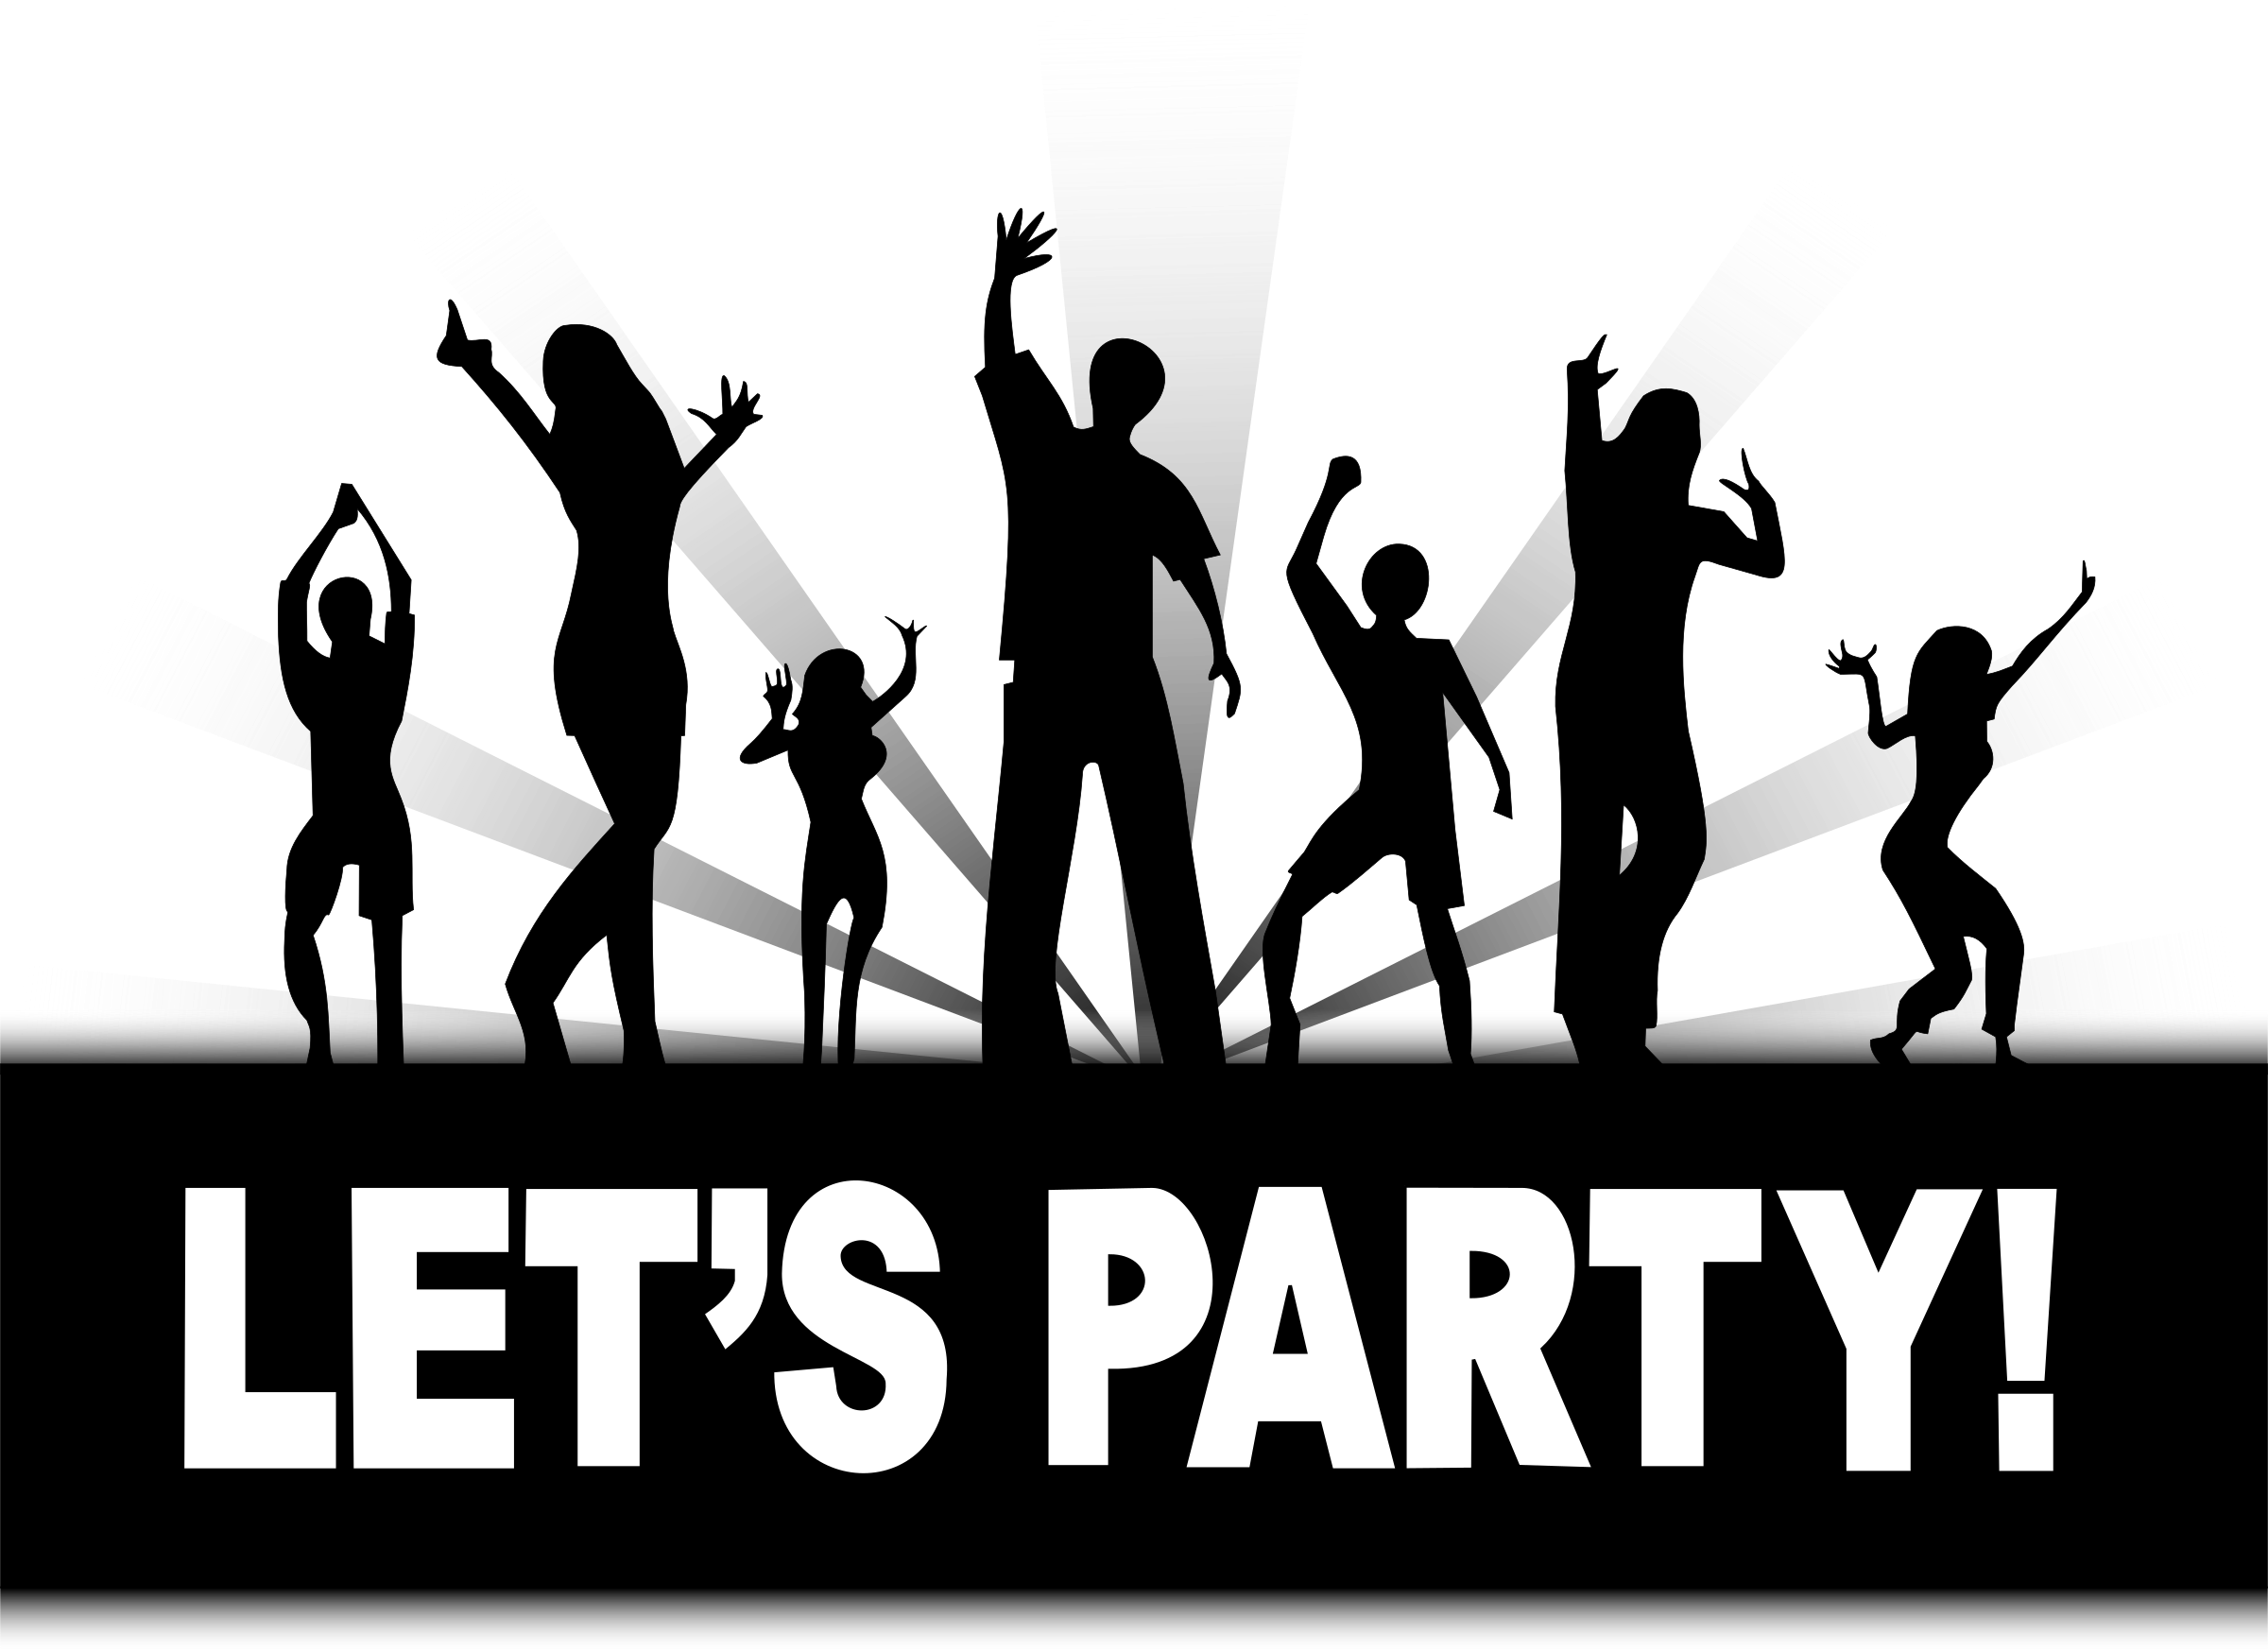 Party clipart class party. The top cities in